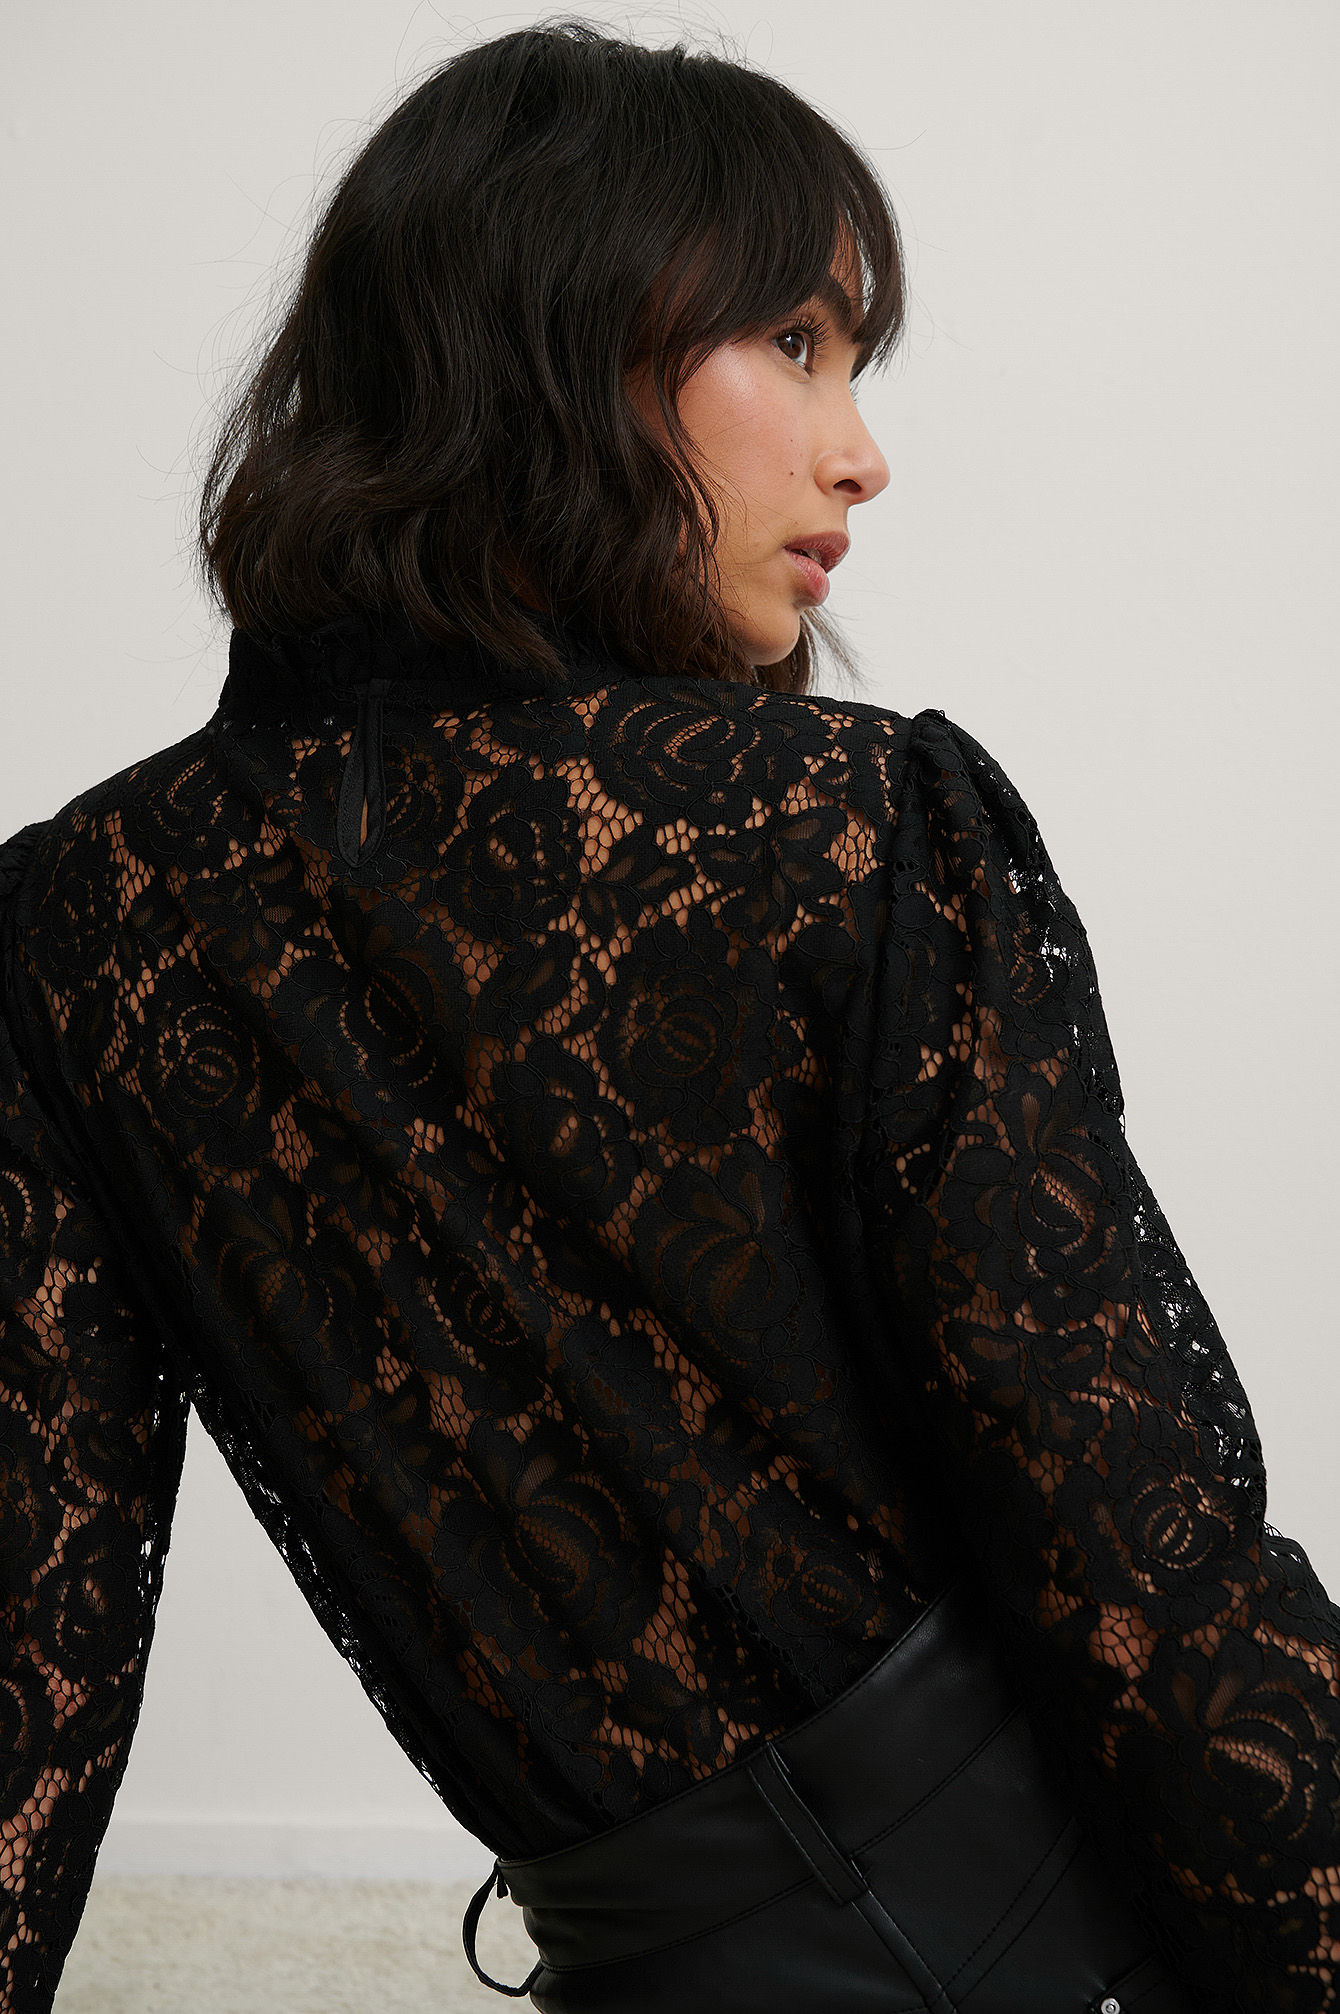 Black High Neck Frill Lace Blouse